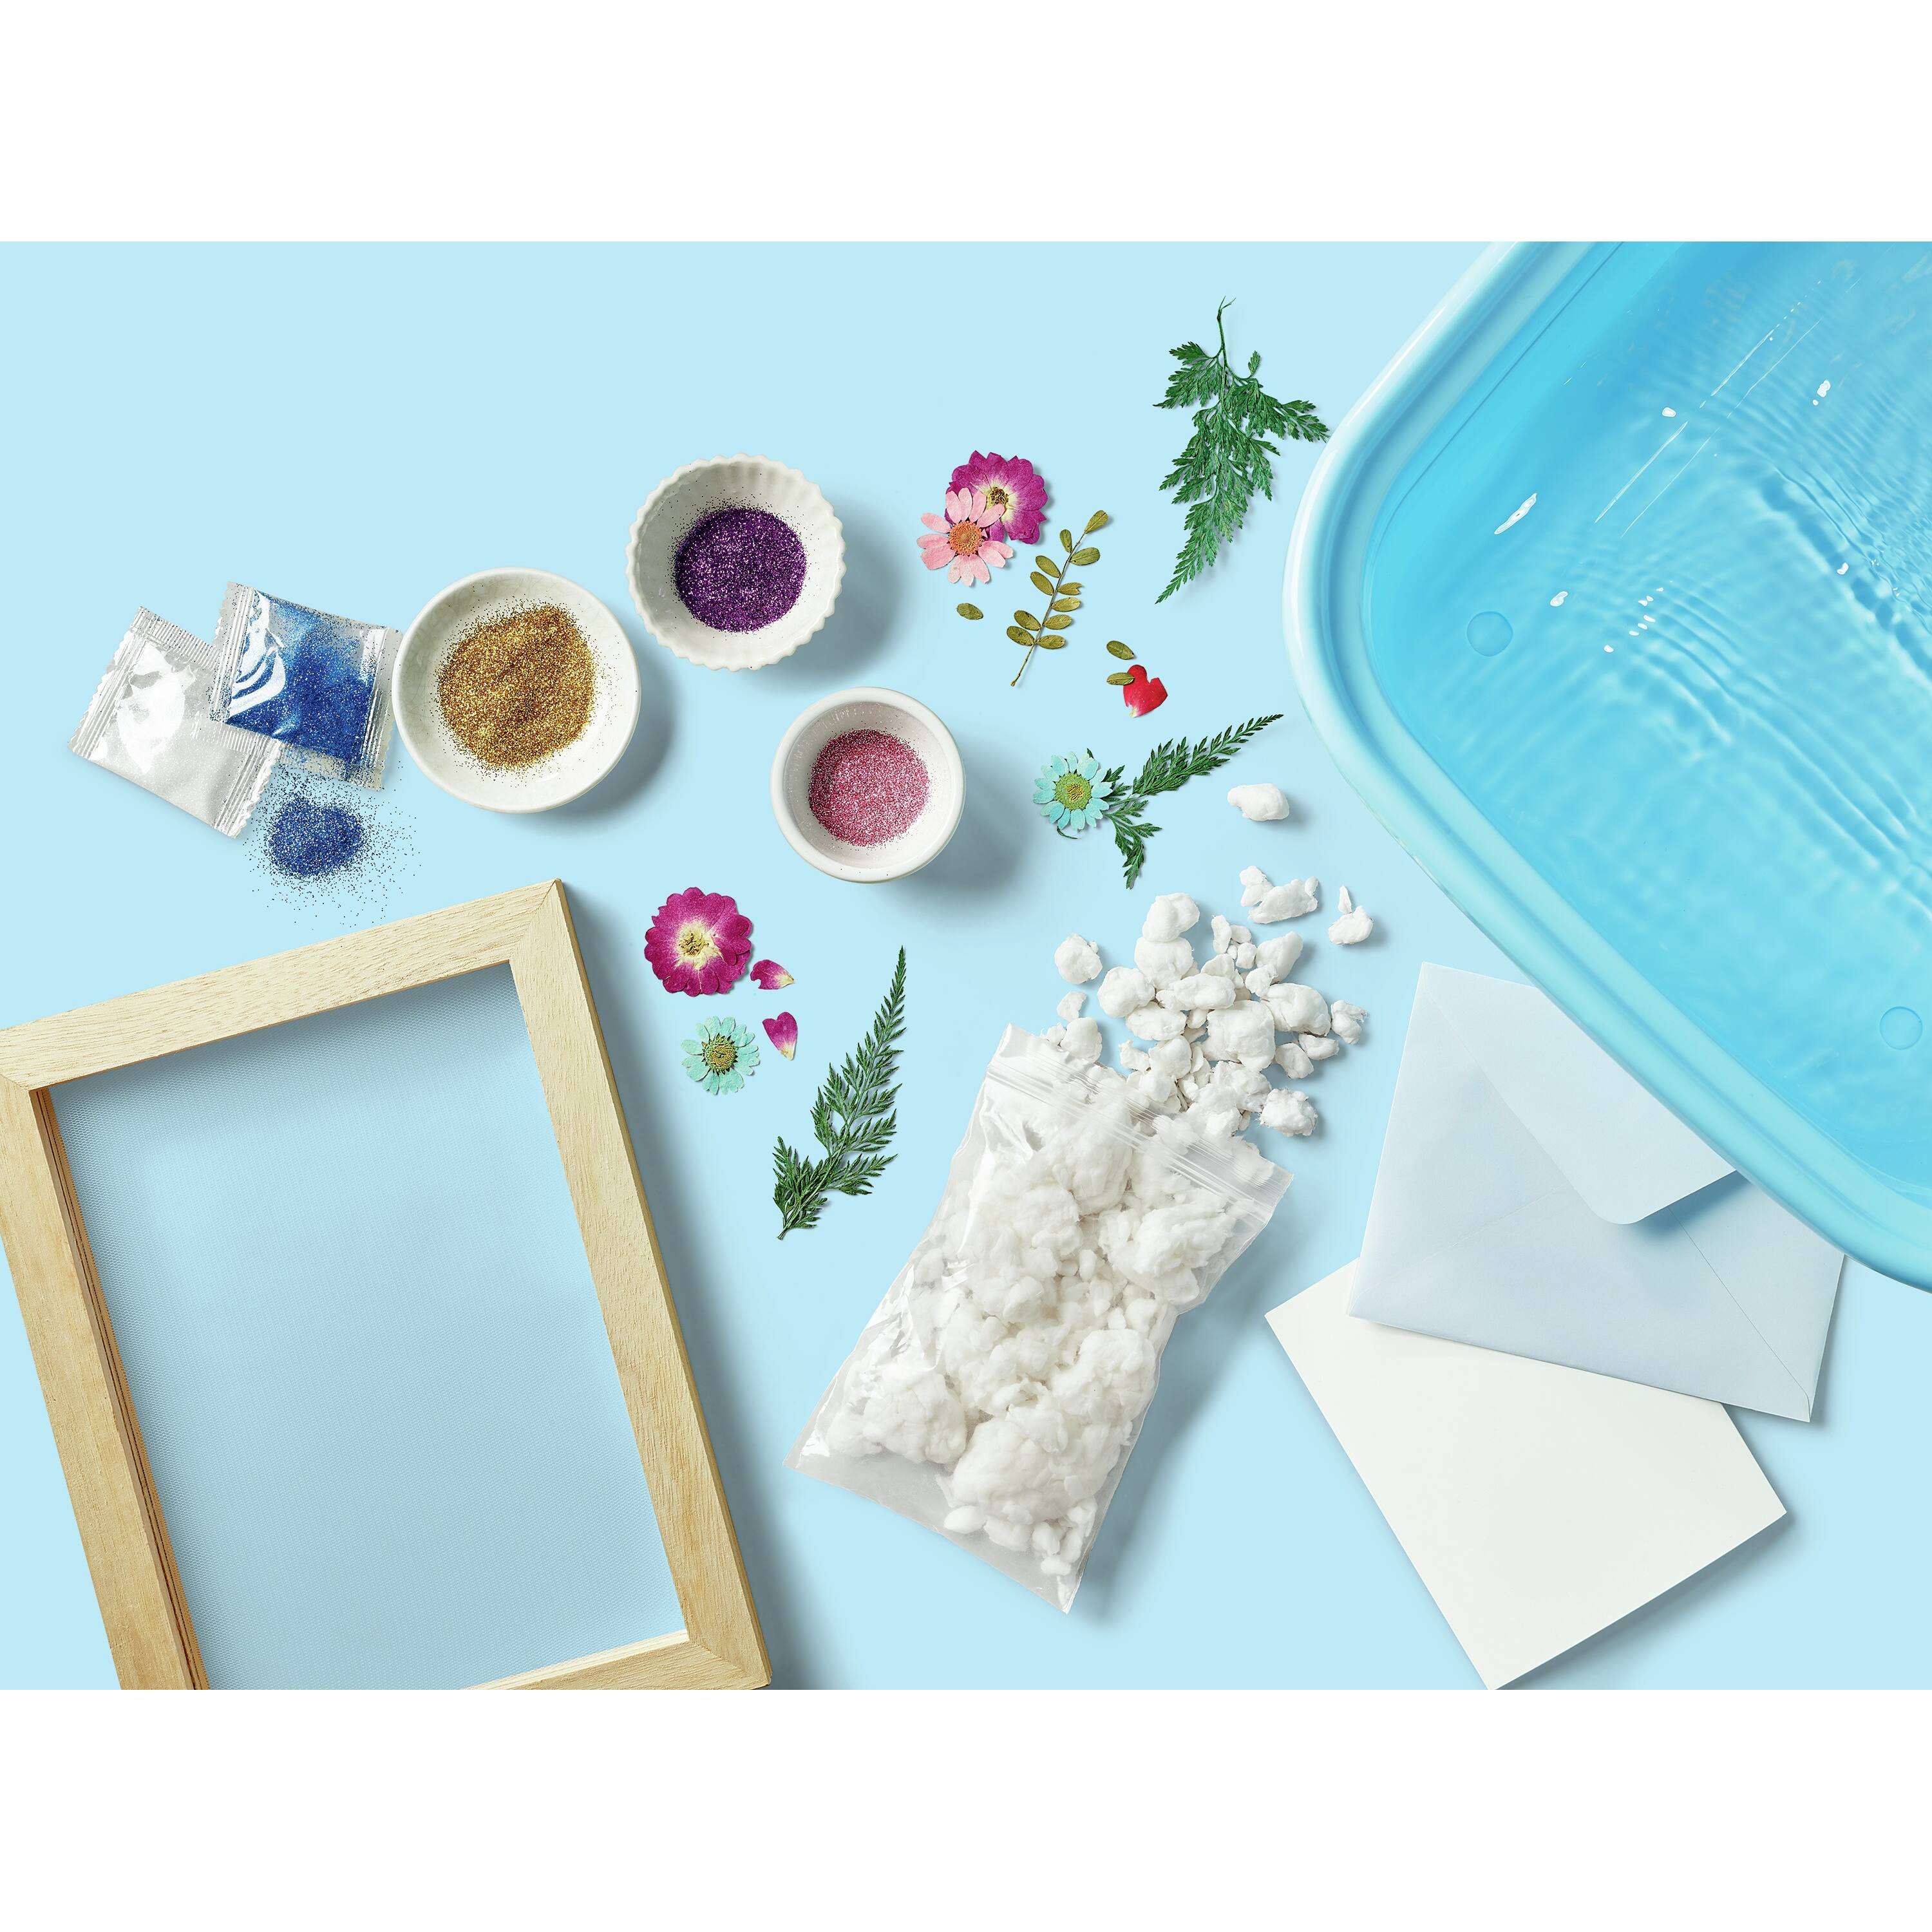 Paper making kits in Michael's #michaelscraftstore